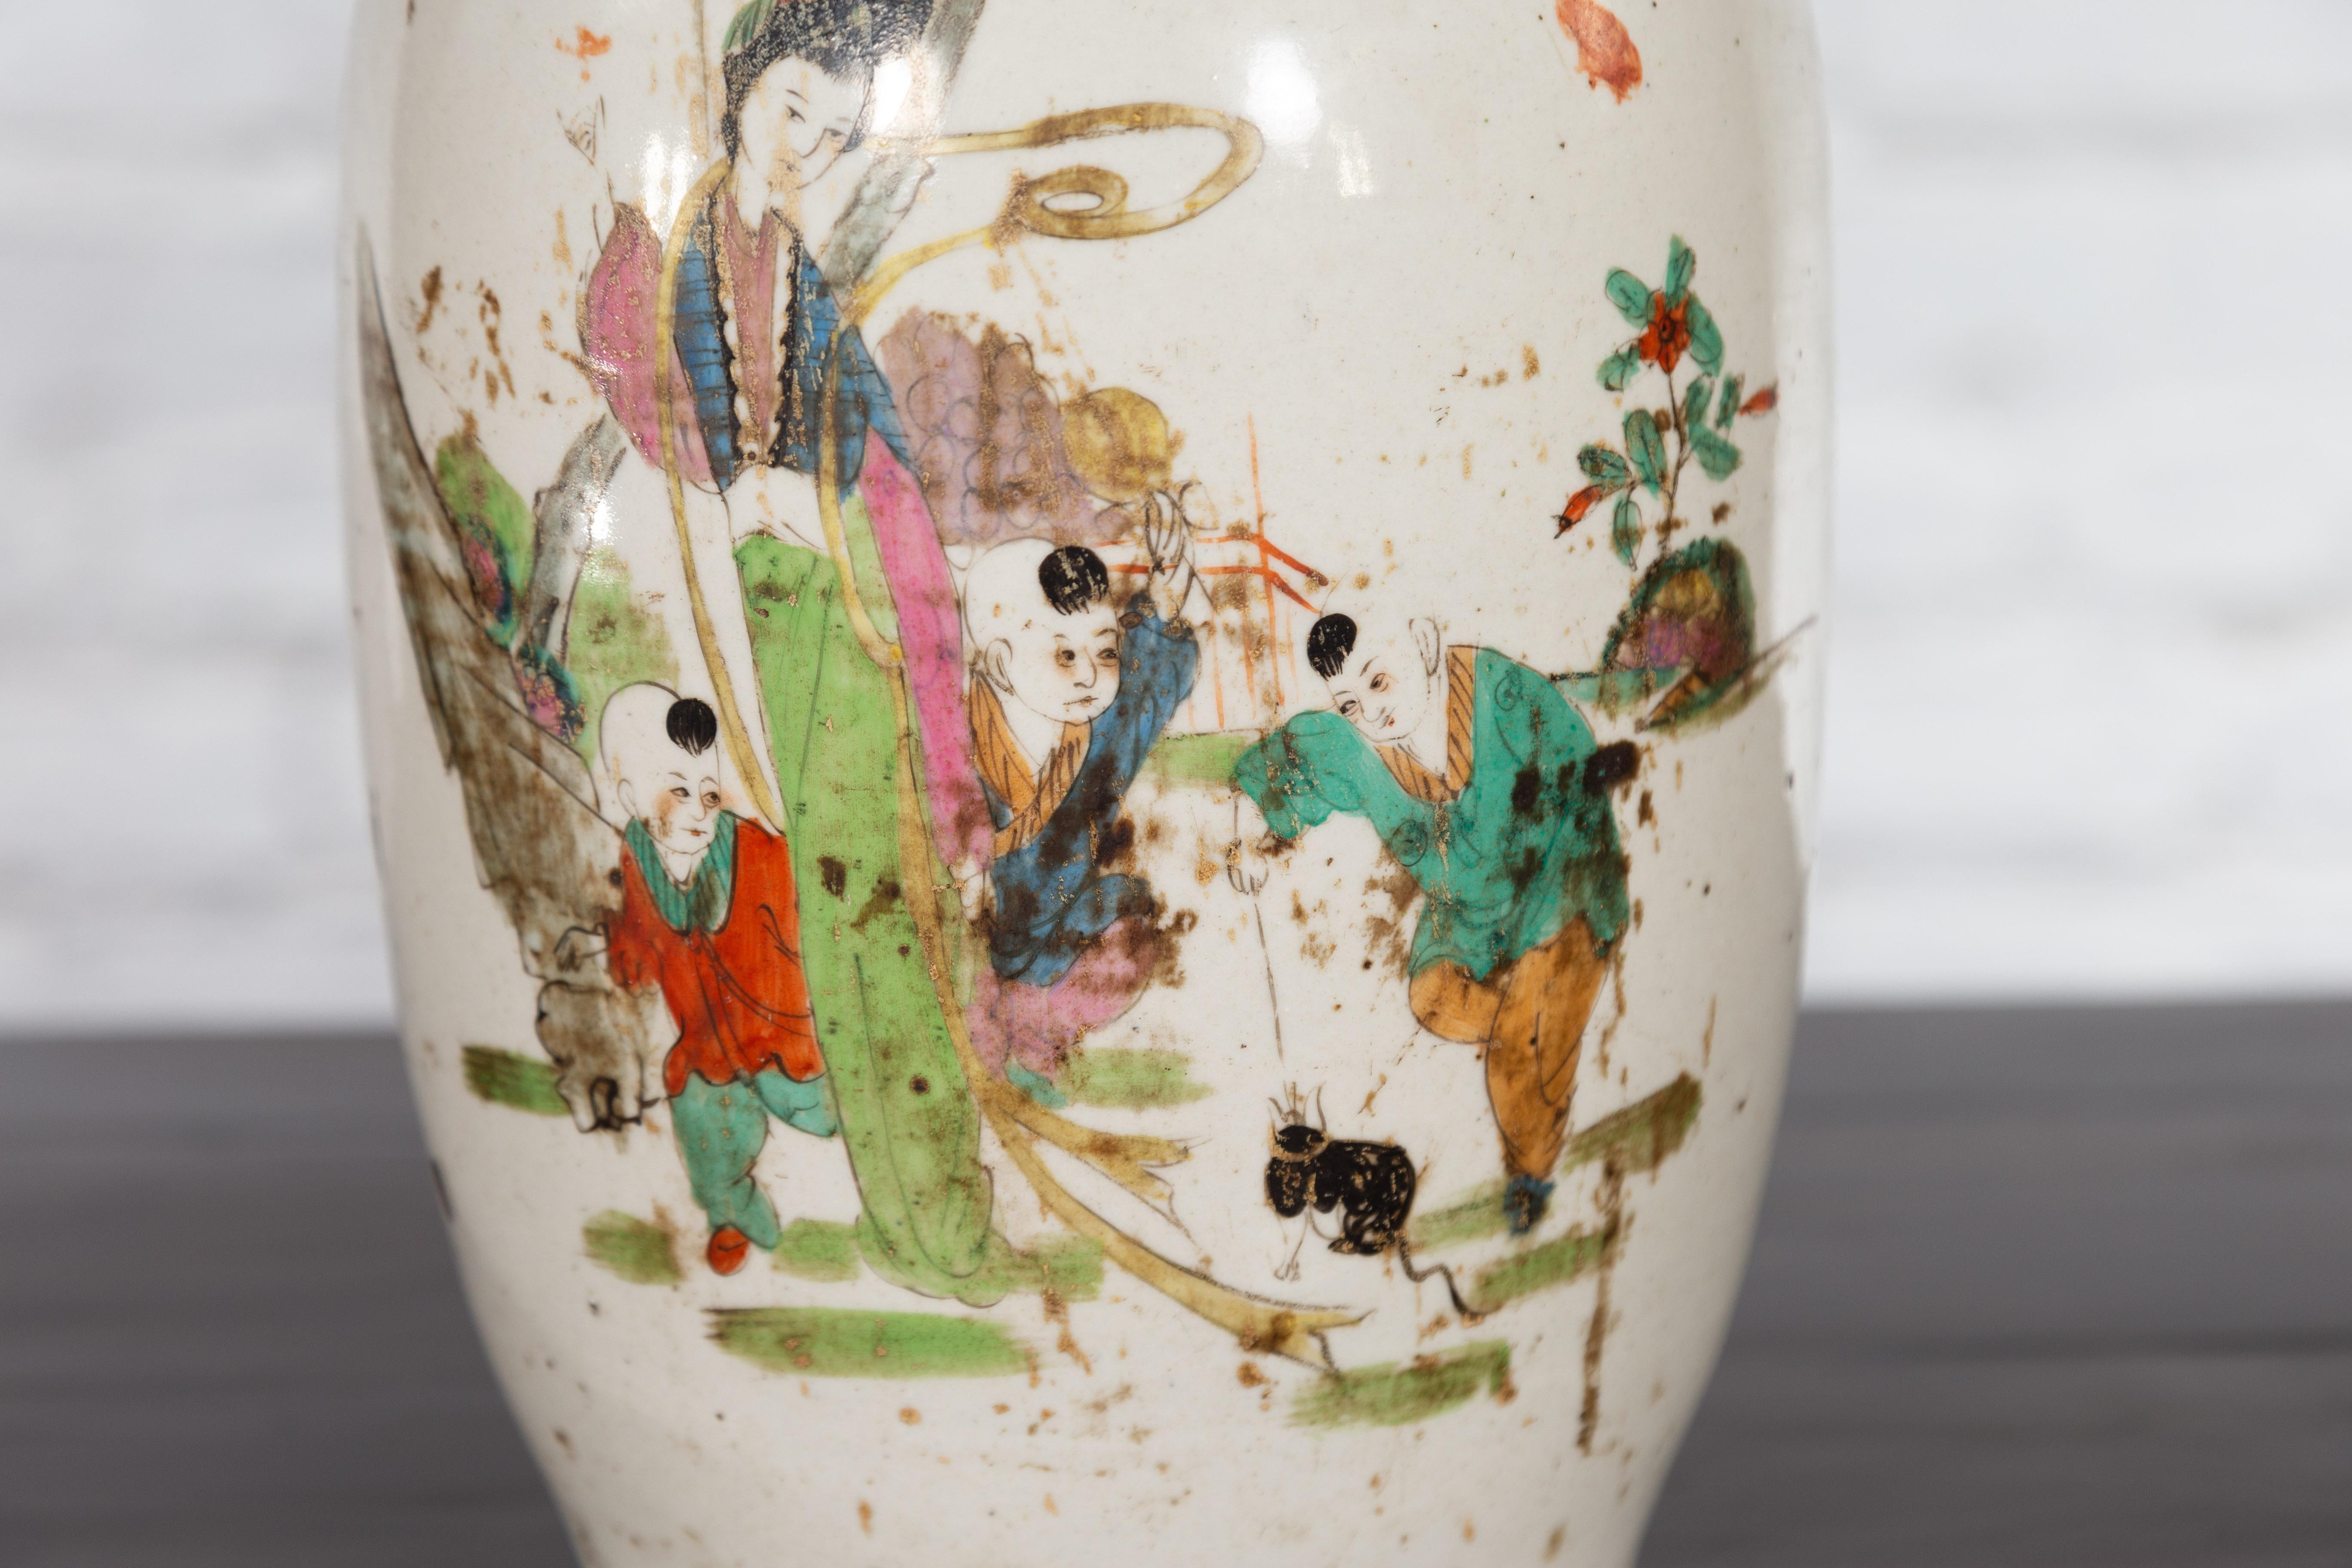 Chinese Porcelain Vase with Hand-Painted Figures and Calligraphy Motifs For Sale 3